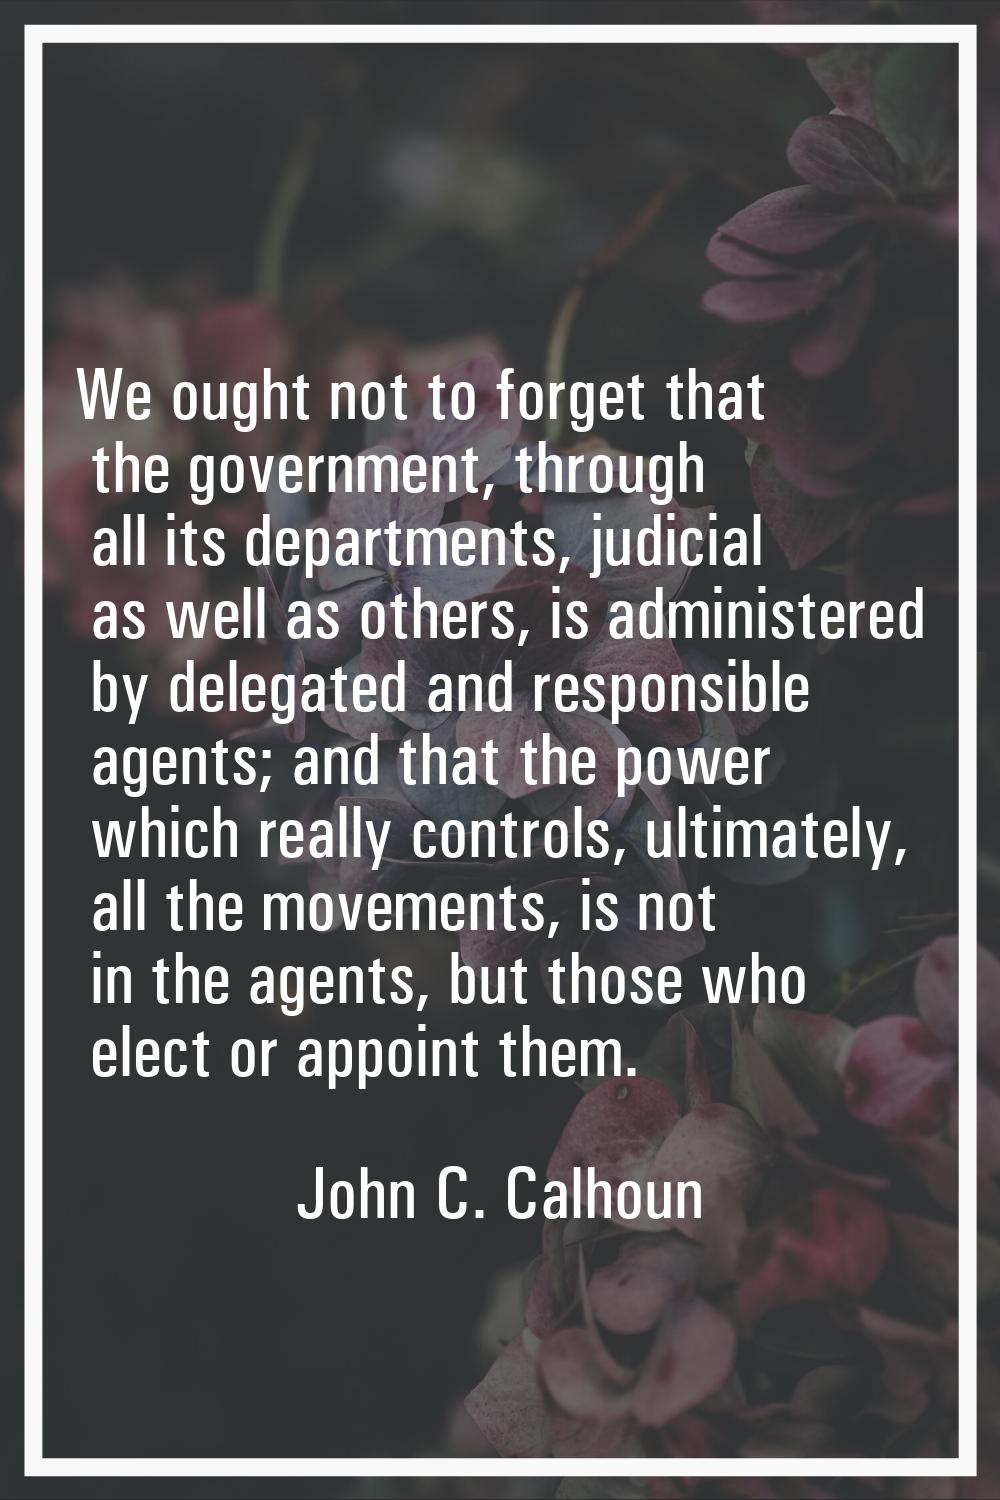 We ought not to forget that the government, through all its departments, judicial as well as others